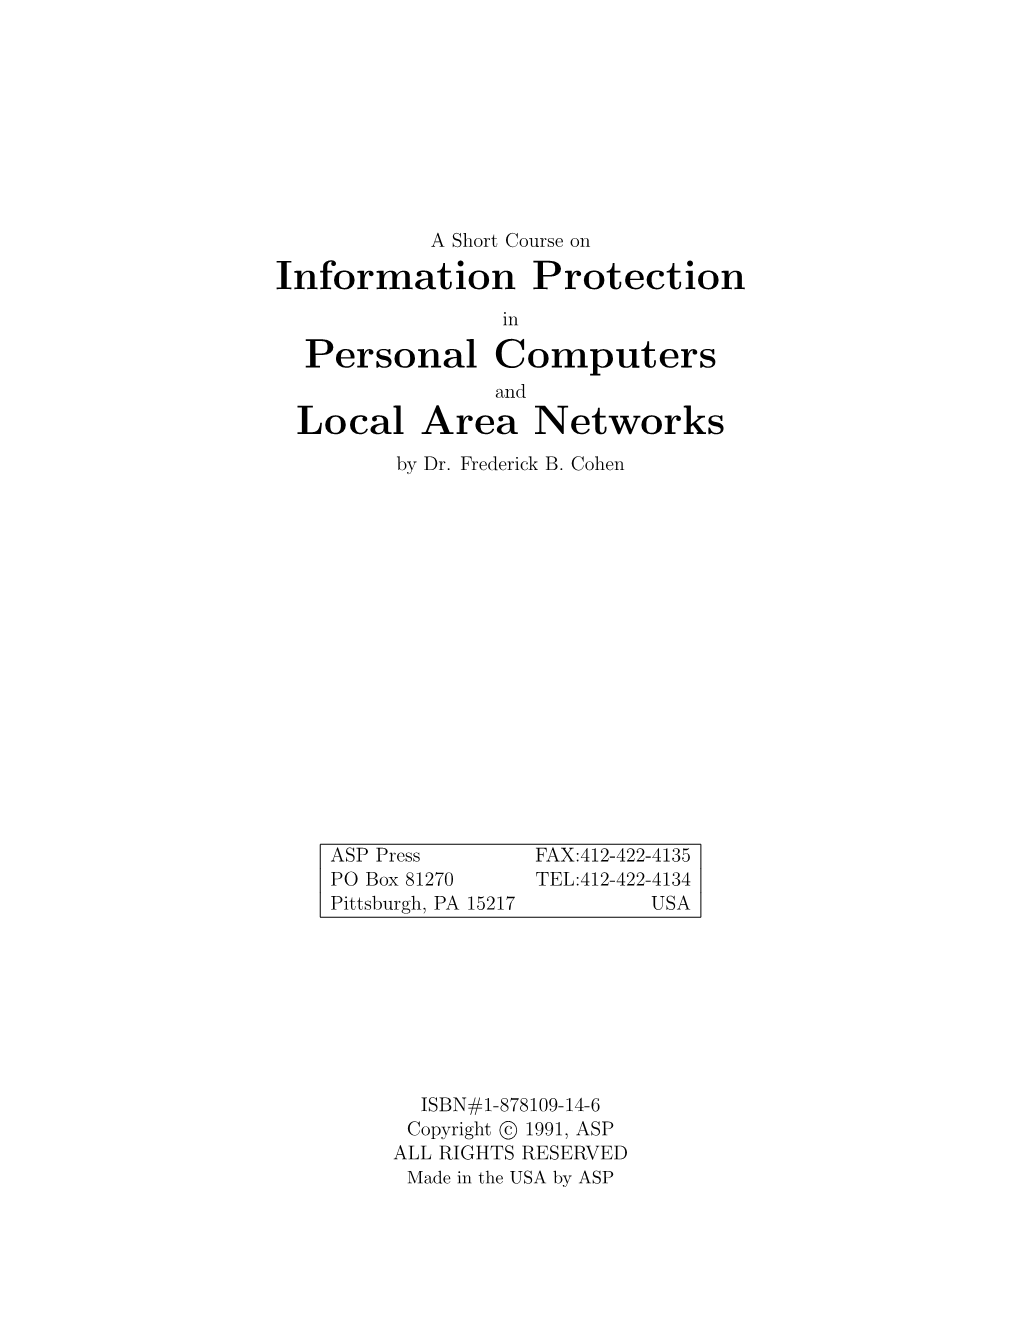 Information Protection Personal Computers Local Area Networks